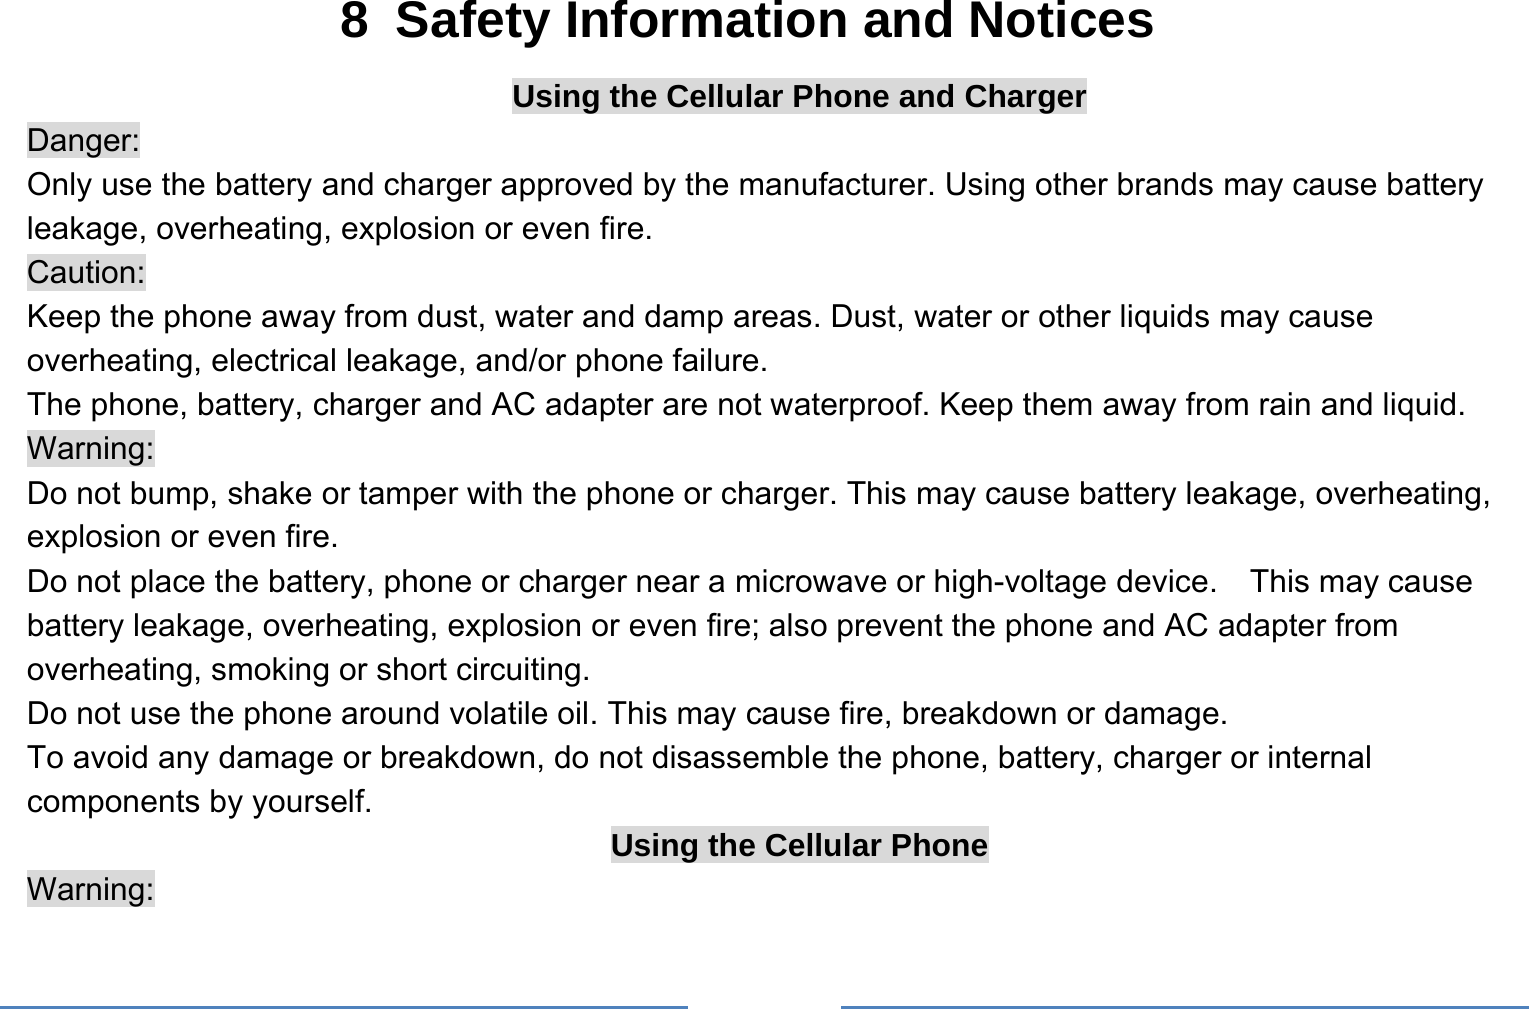     8  Safety Information and Notices Using the Cellular Phone and Charger Danger: Only use the battery and charger approved by the manufacturer. Using other brands may cause battery leakage, overheating, explosion or even fire. Caution: Keep the phone away from dust, water and damp areas. Dust, water or other liquids may cause overheating, electrical leakage, and/or phone failure.   The phone, battery, charger and AC adapter are not waterproof. Keep them away from rain and liquid. Warning: Do not bump, shake or tamper with the phone or charger. This may cause battery leakage, overheating, explosion or even fire. Do not place the battery, phone or charger near a microwave or high-voltage device.    This may cause battery leakage, overheating, explosion or even fire; also prevent the phone and AC adapter from overheating, smoking or short circuiting. Do not use the phone around volatile oil. This may cause fire, breakdown or damage. To avoid any damage or breakdown, do not disassemble the phone, battery, charger or internal components by yourself. Using the Cellular Phone Warning: 